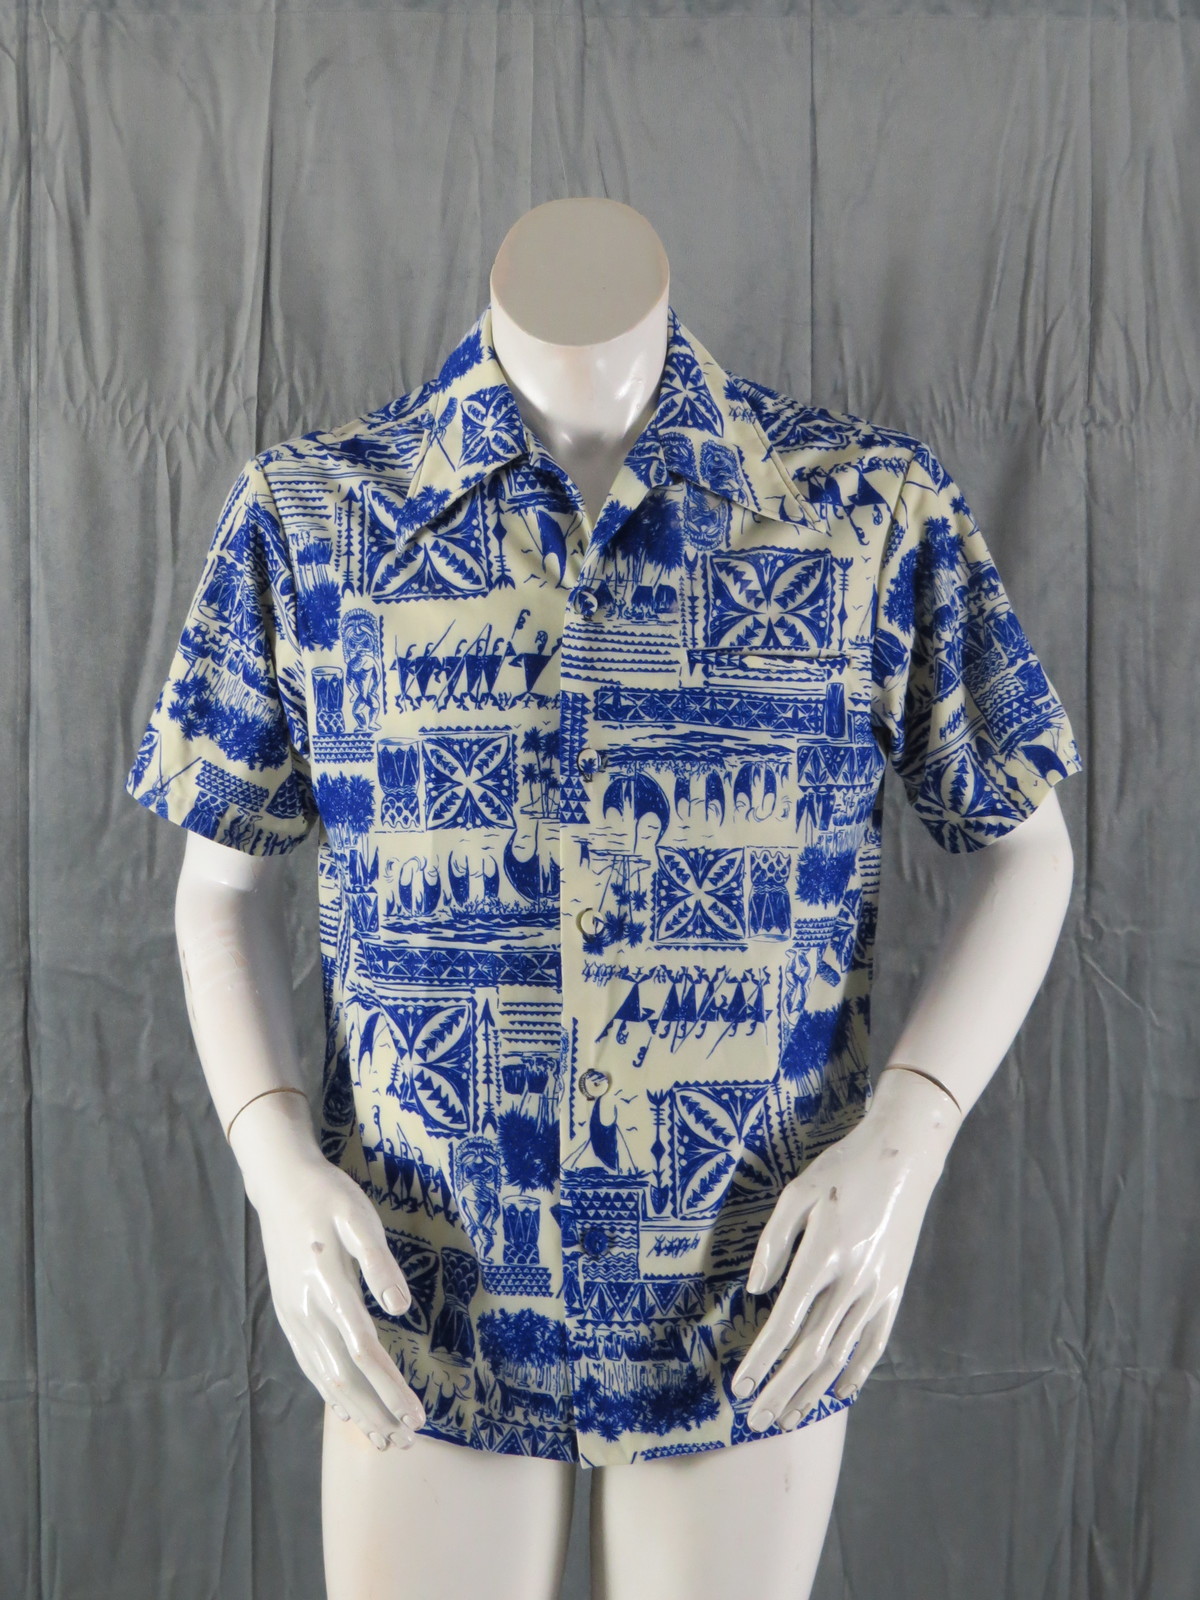 Primary image for Vintage Hawaiian Shirt - Tribal and Ku Pattern by Pacific Isle - Men's Medium